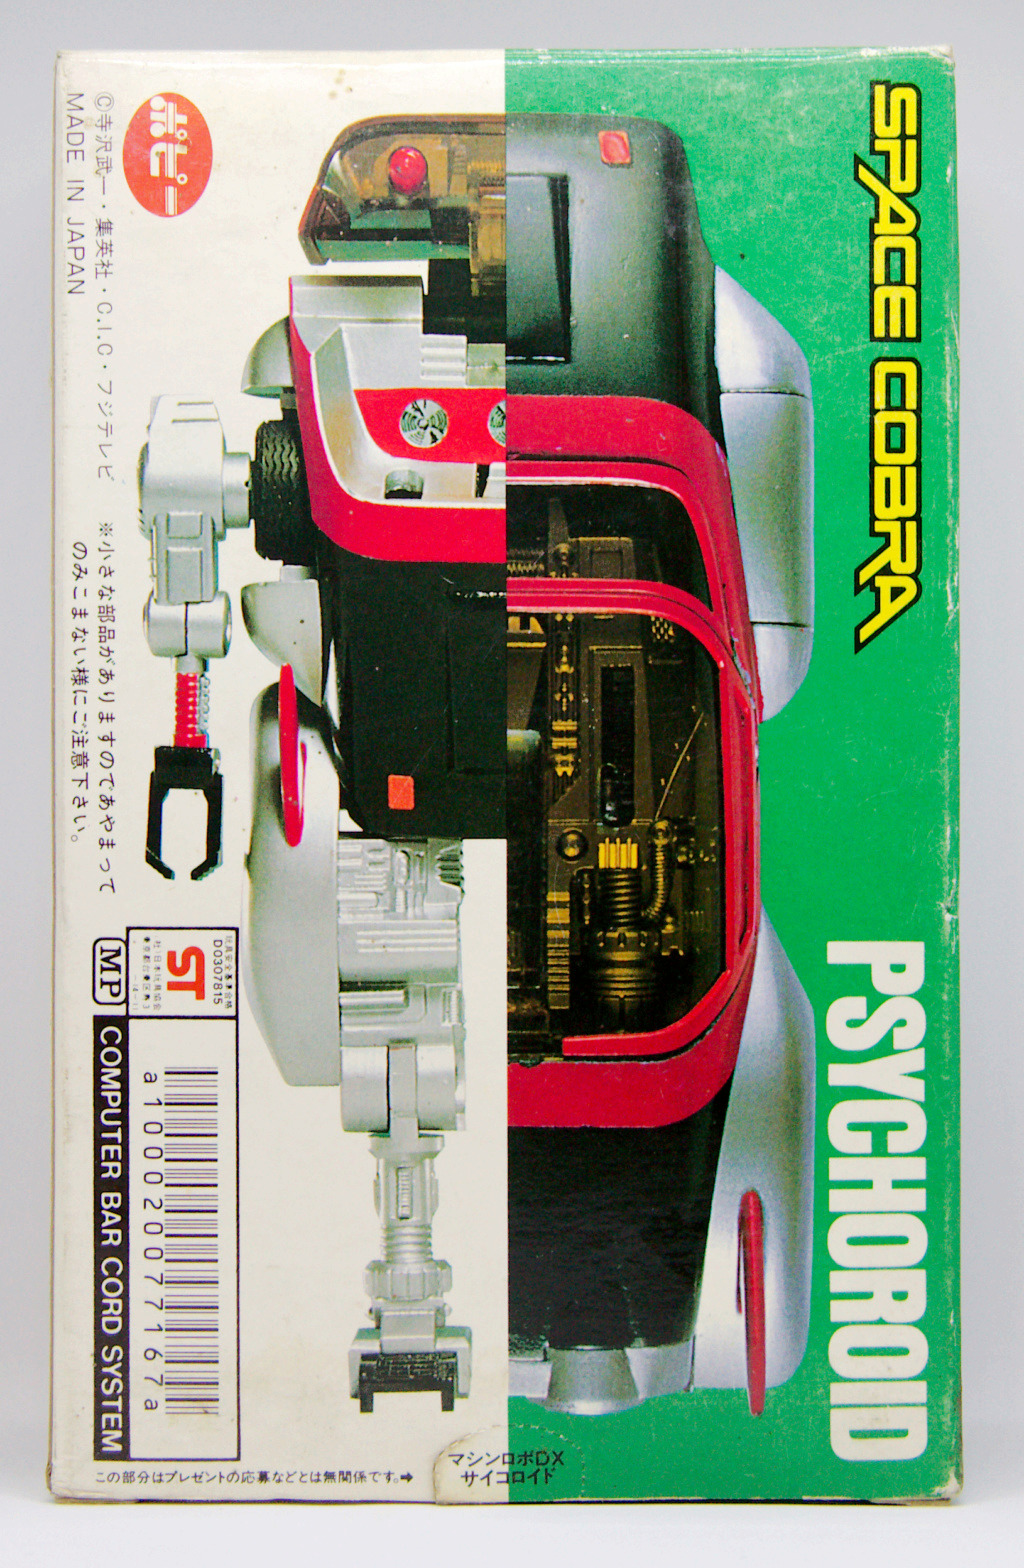 Pilgrim's collection (Gobots, Transformers...) - Page 27 Img_8523